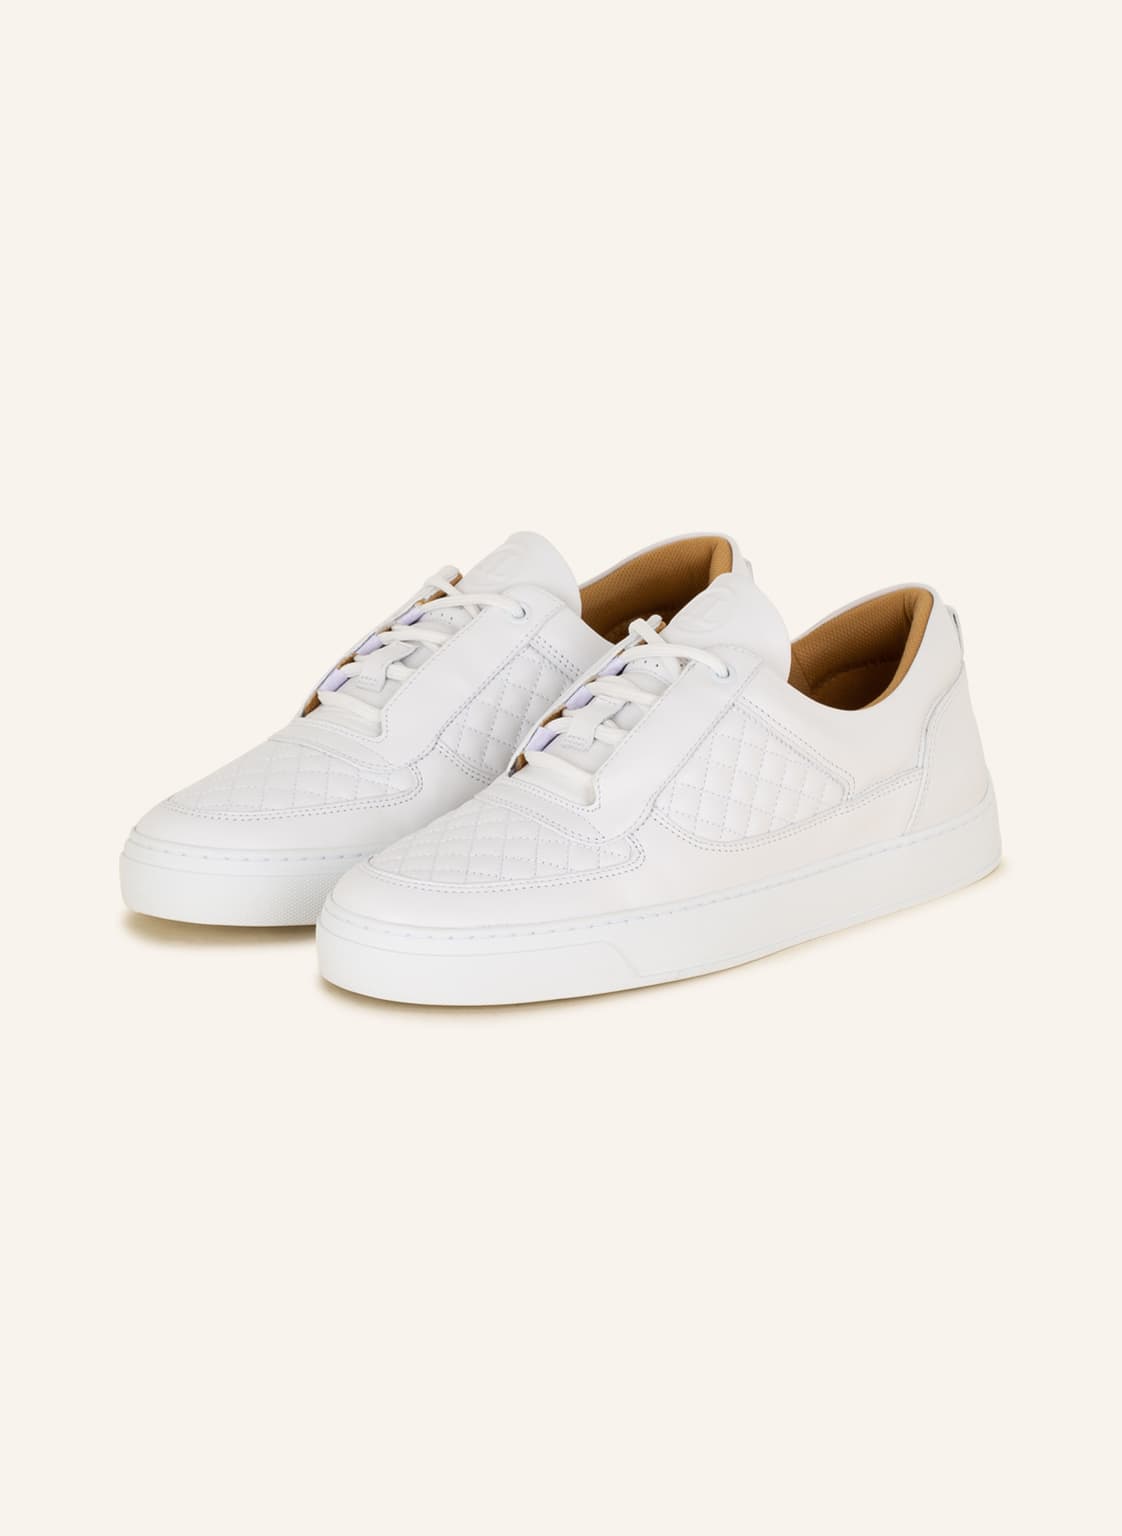 Leandro Lopes Sneaker Faisca weiss von LEANDRO LOPES